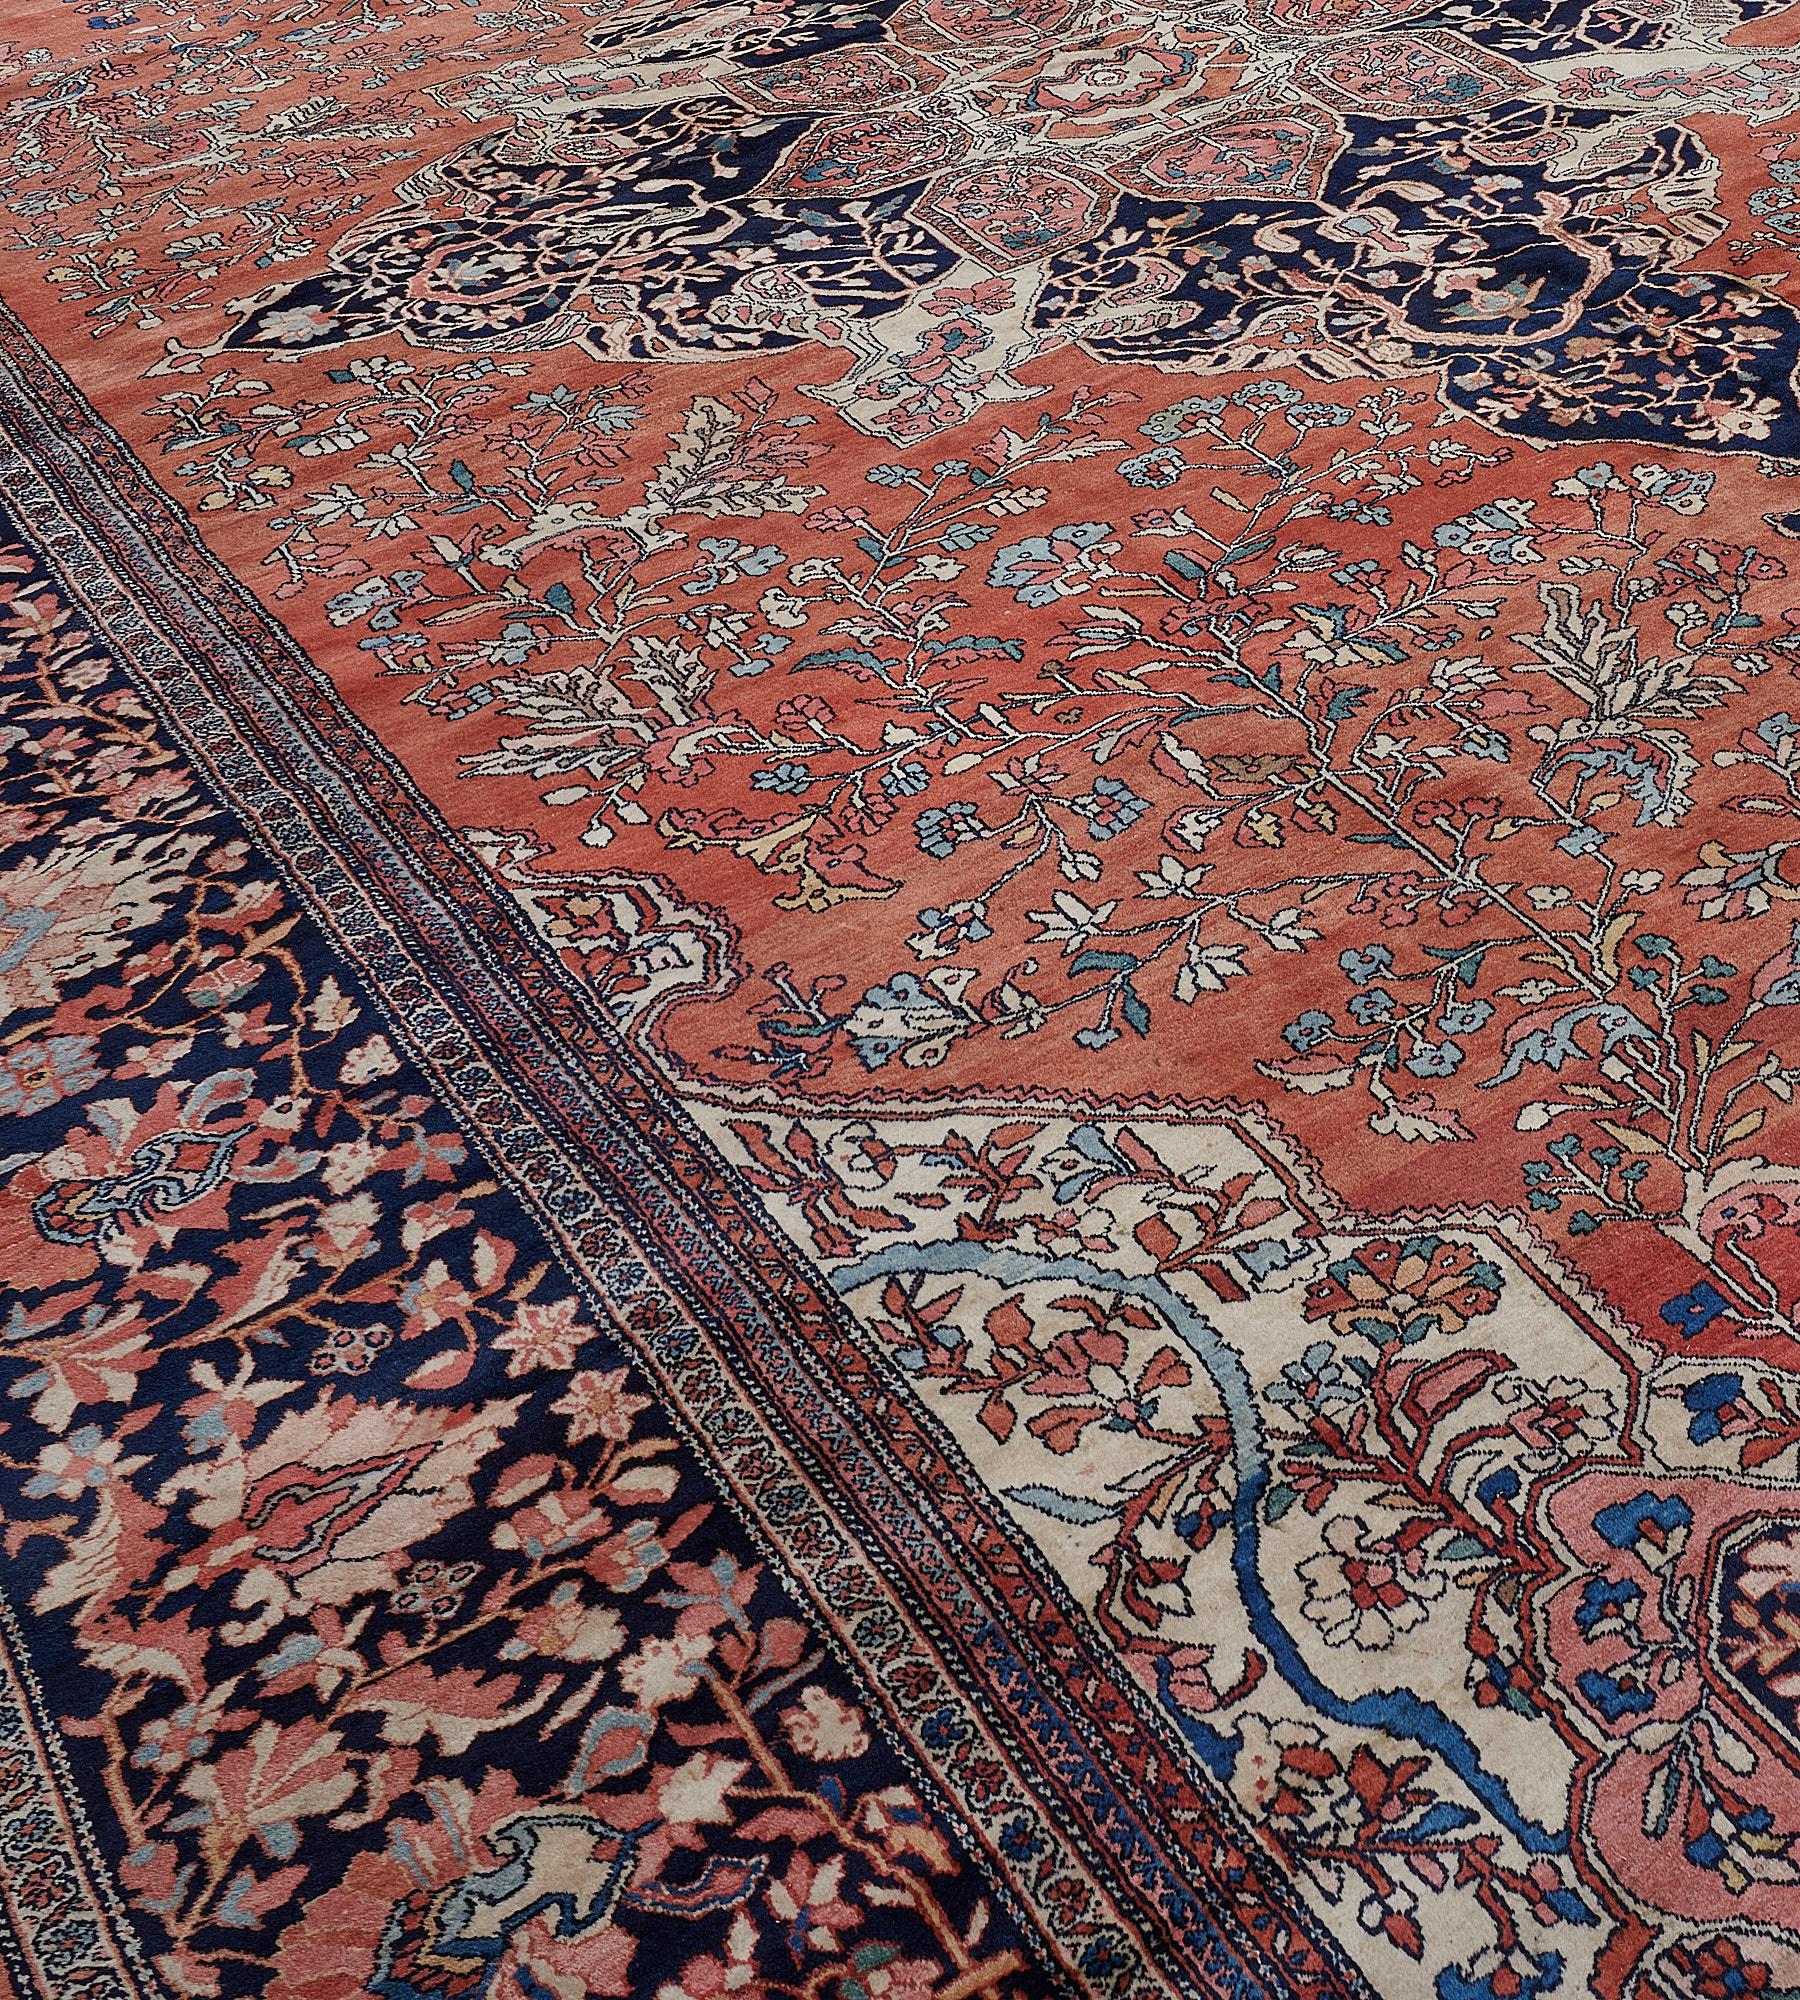 This Fereghan rug has a brick-red field with a vase motif at each end issuing a floral spray and surrounded by a delicate polychrome floral vine around a central indigo-blue cusped medallion with shield palmettes containing a central brick-red